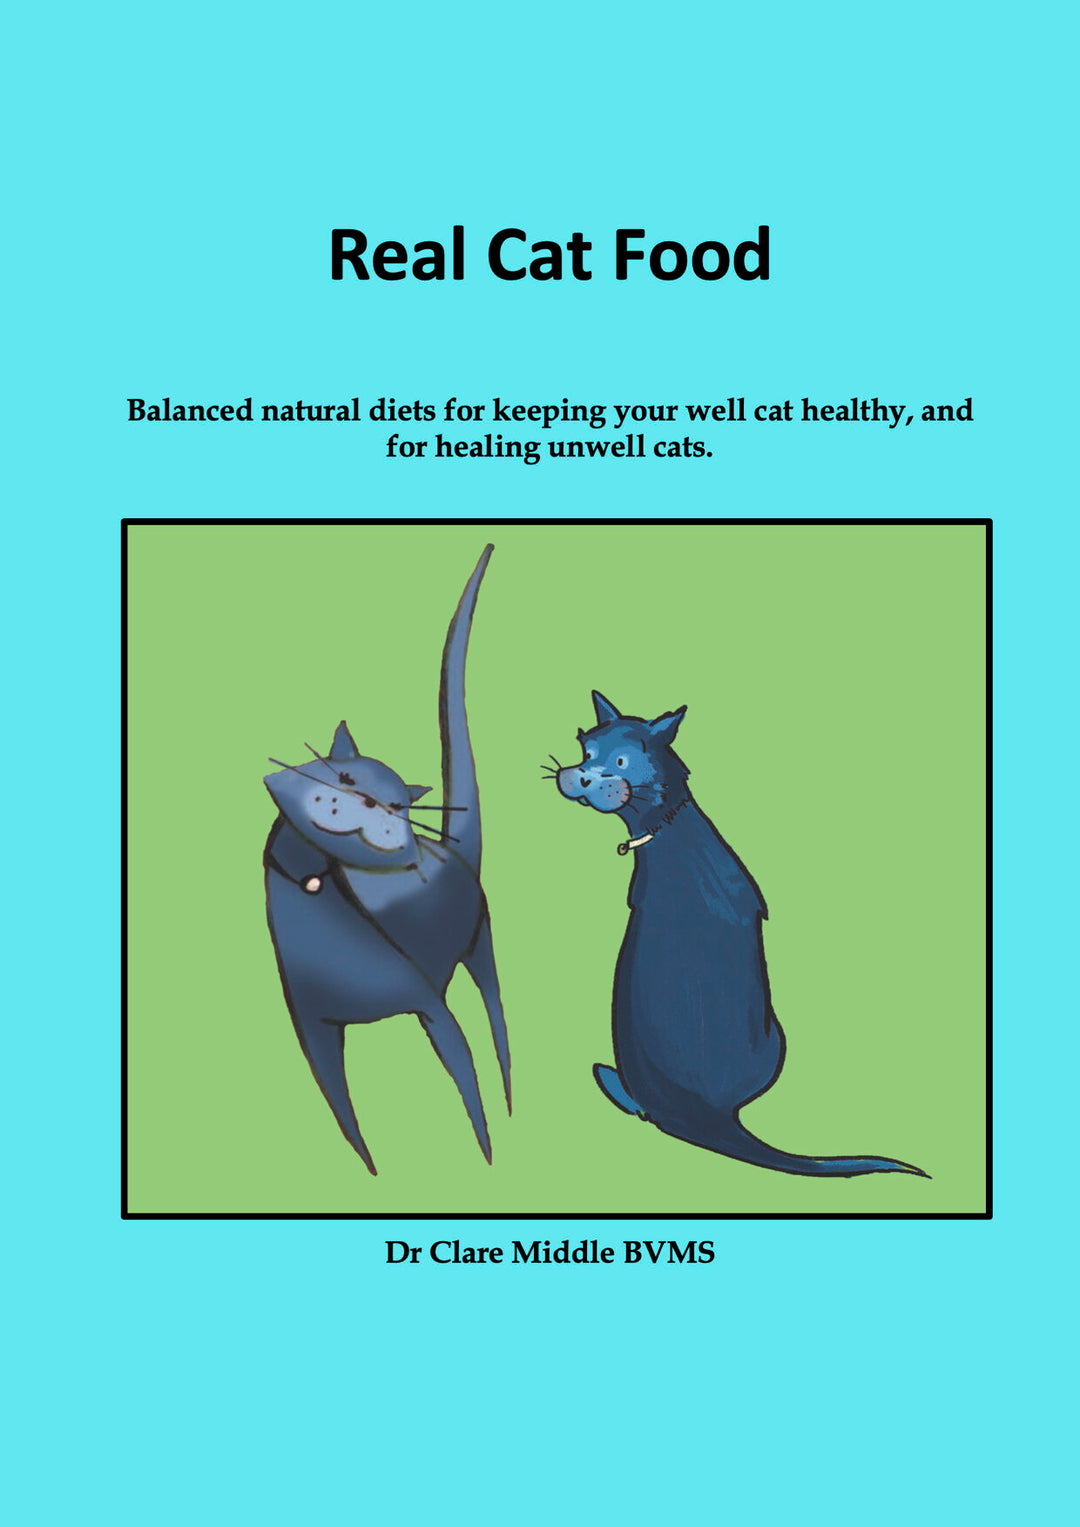 Real Cat Food by Dr Clare Middle